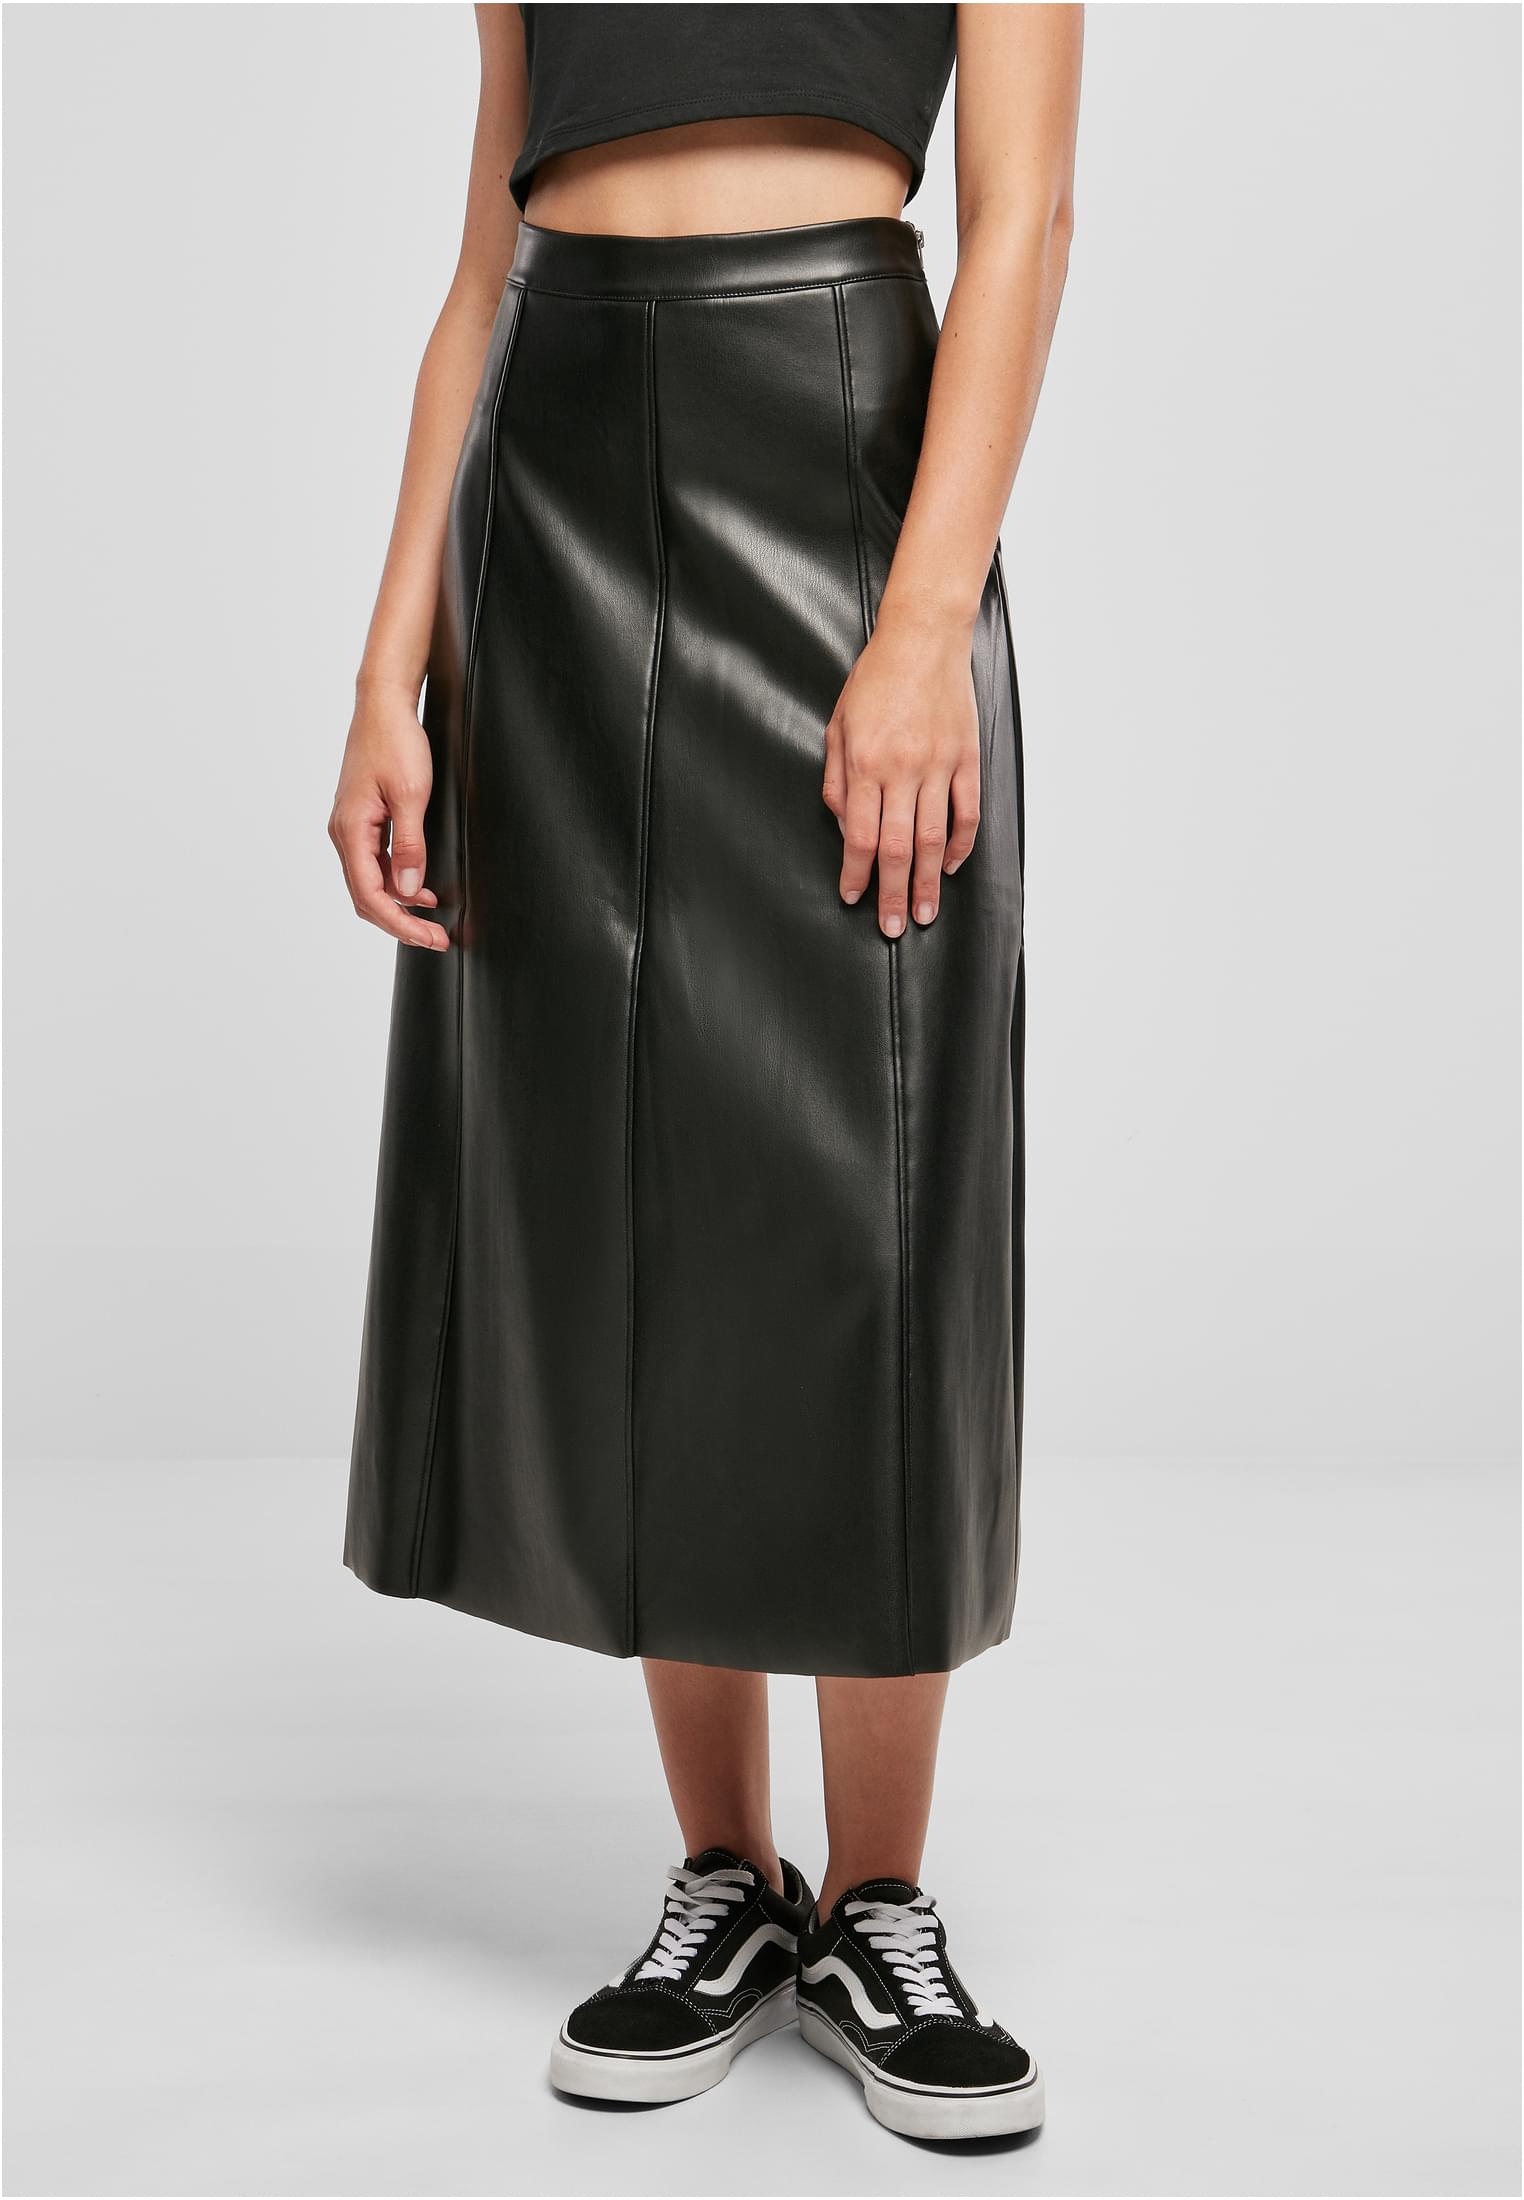 Women's midi skirt made of synthetic leather black